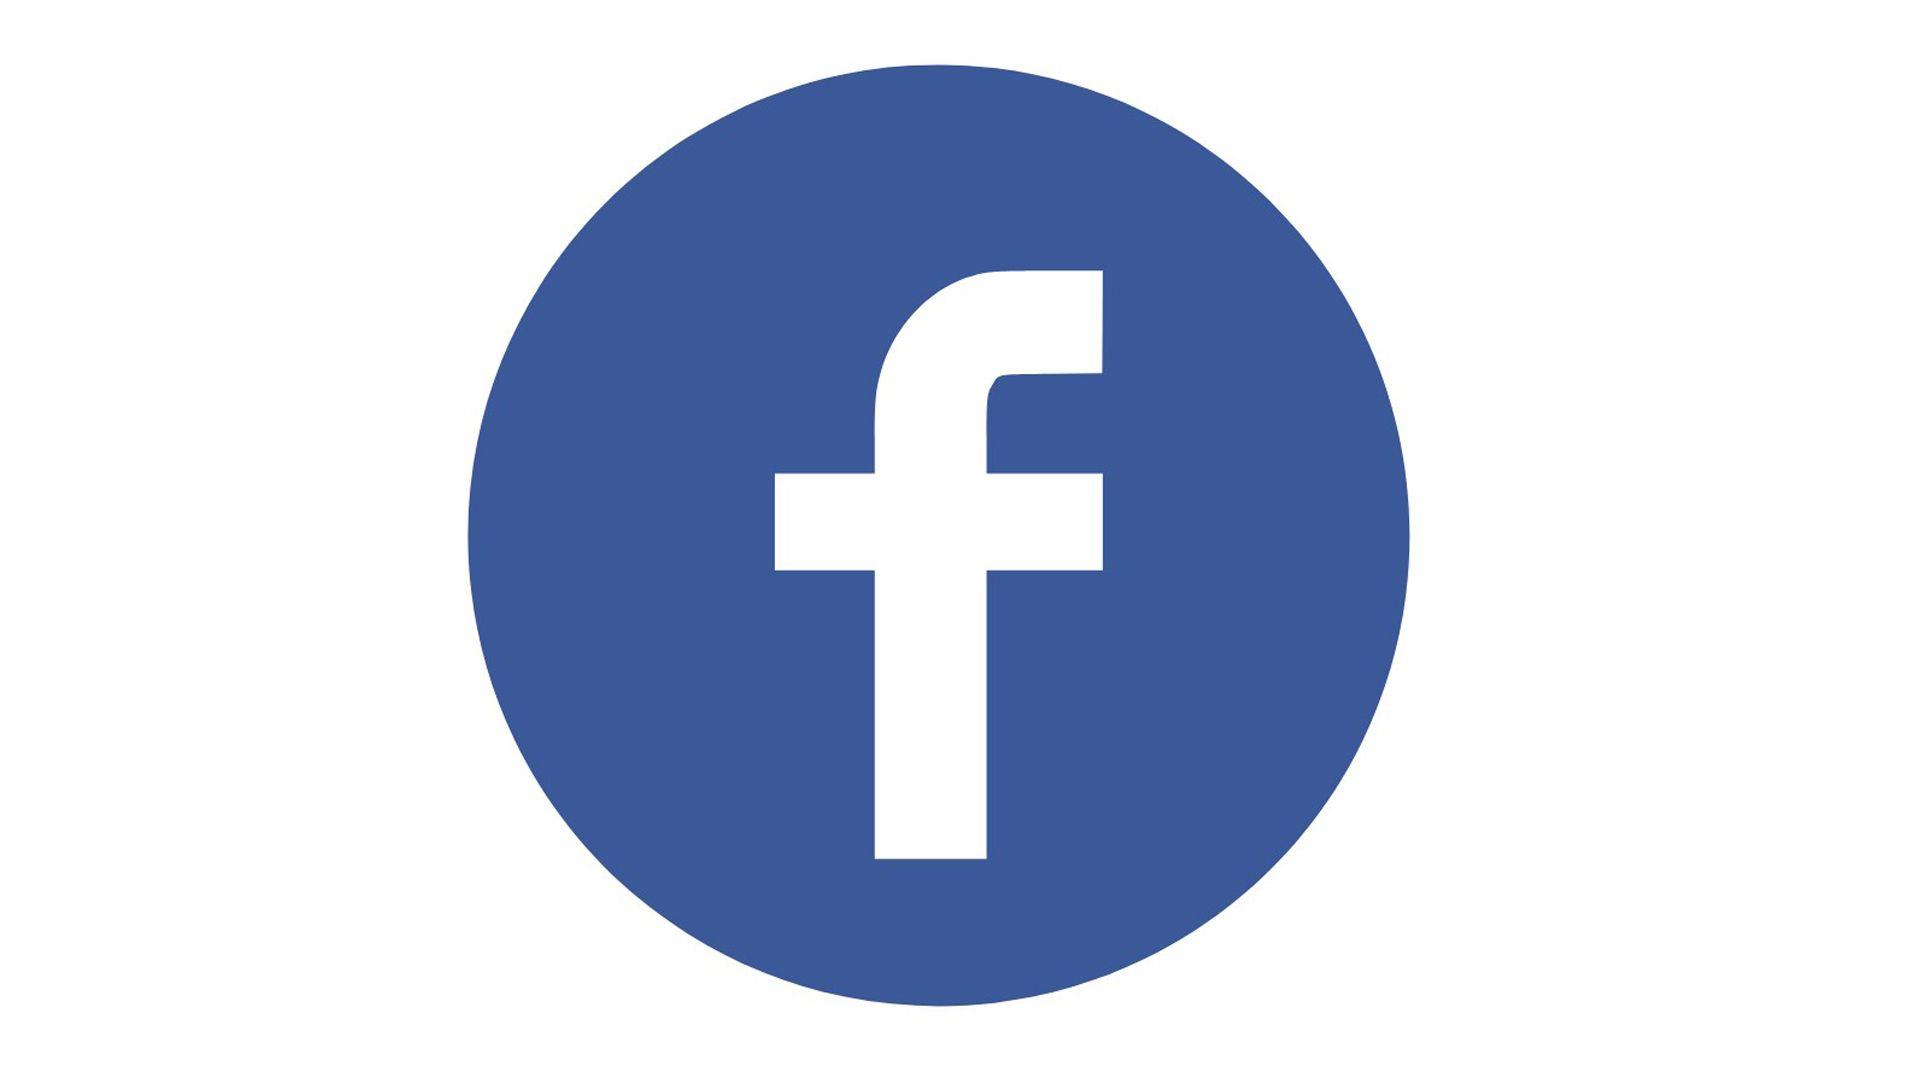 I Can Use Facebook Logo - Facebook Logo, FB symbol meaning, History and Evolution